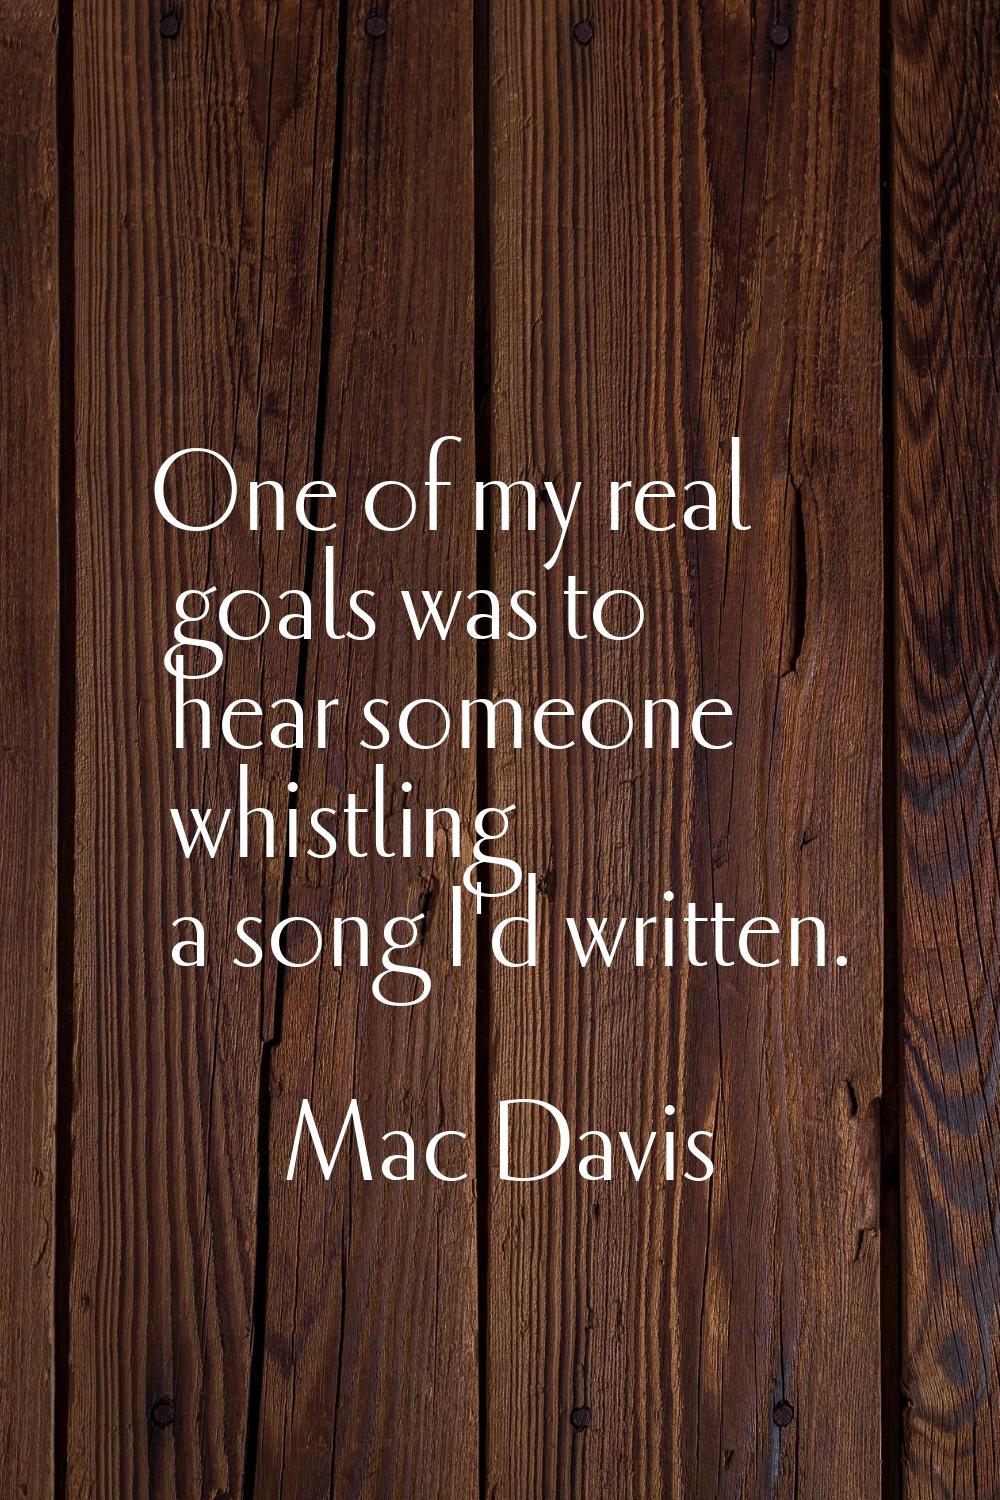 One of my real goals was to hear someone whistling a song I'd written.